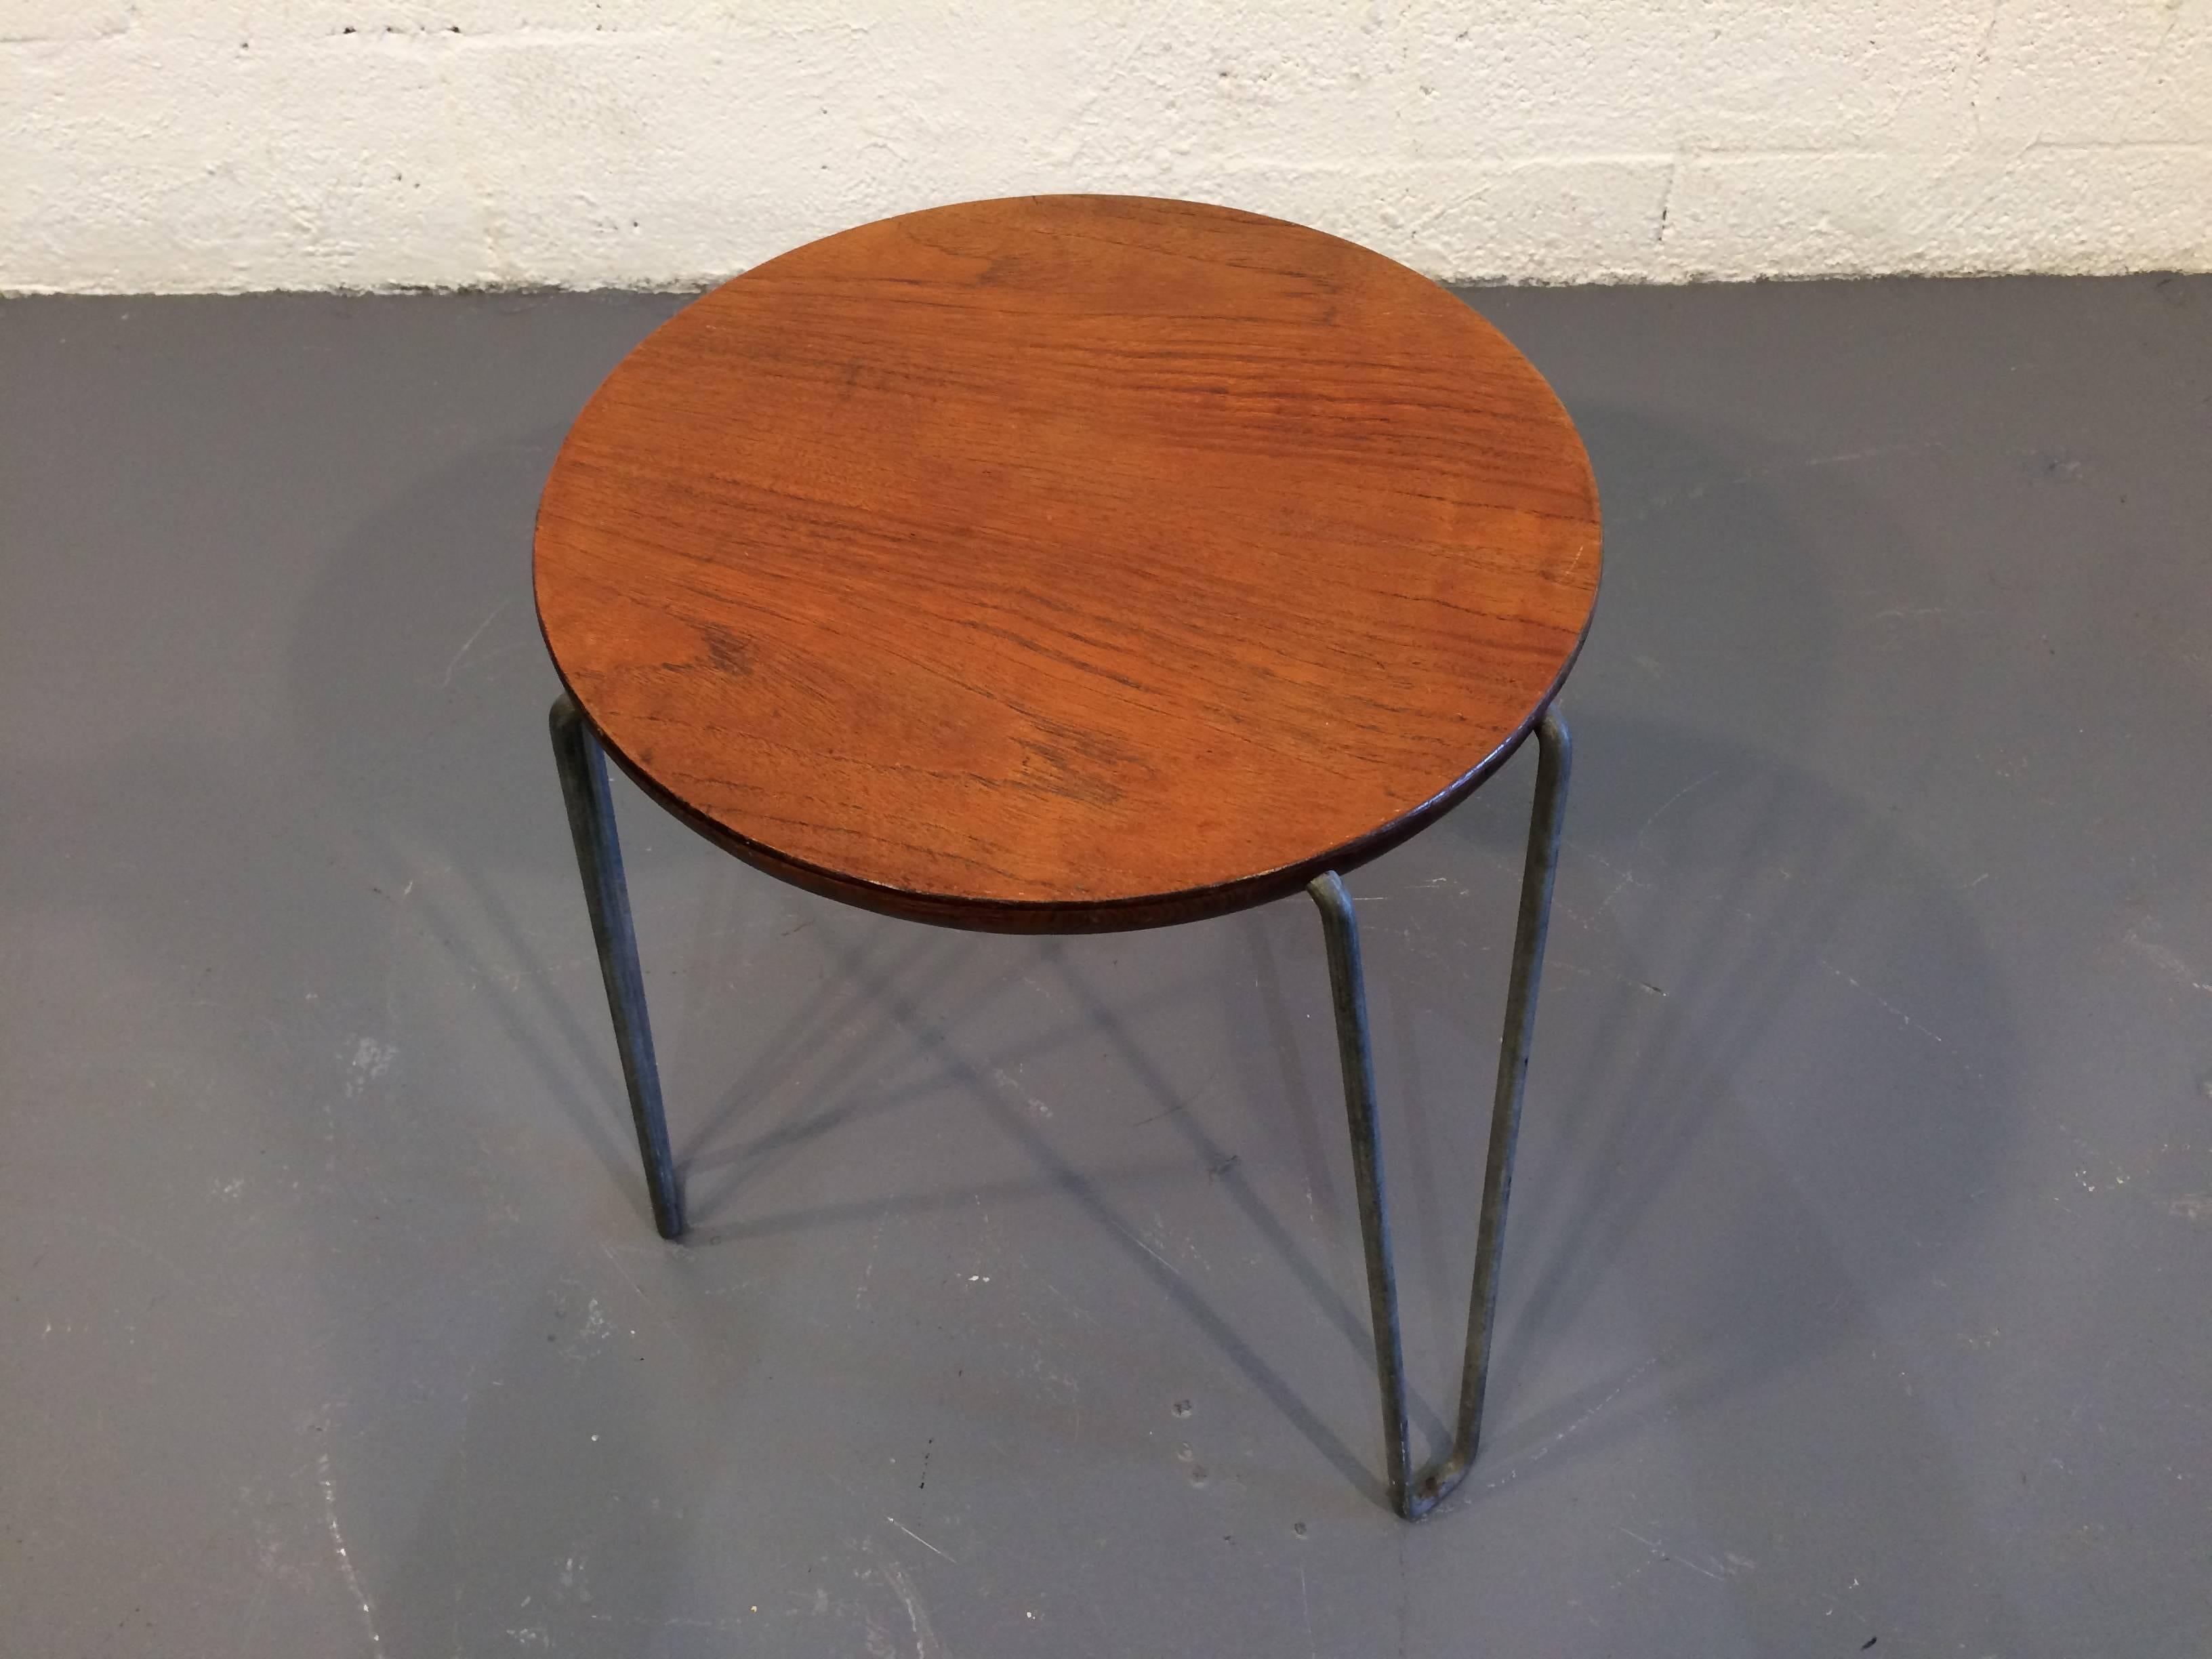 Beautiful Three-Legged Mid-Century Modern Stool In Good Condition For Sale In Miami, FL